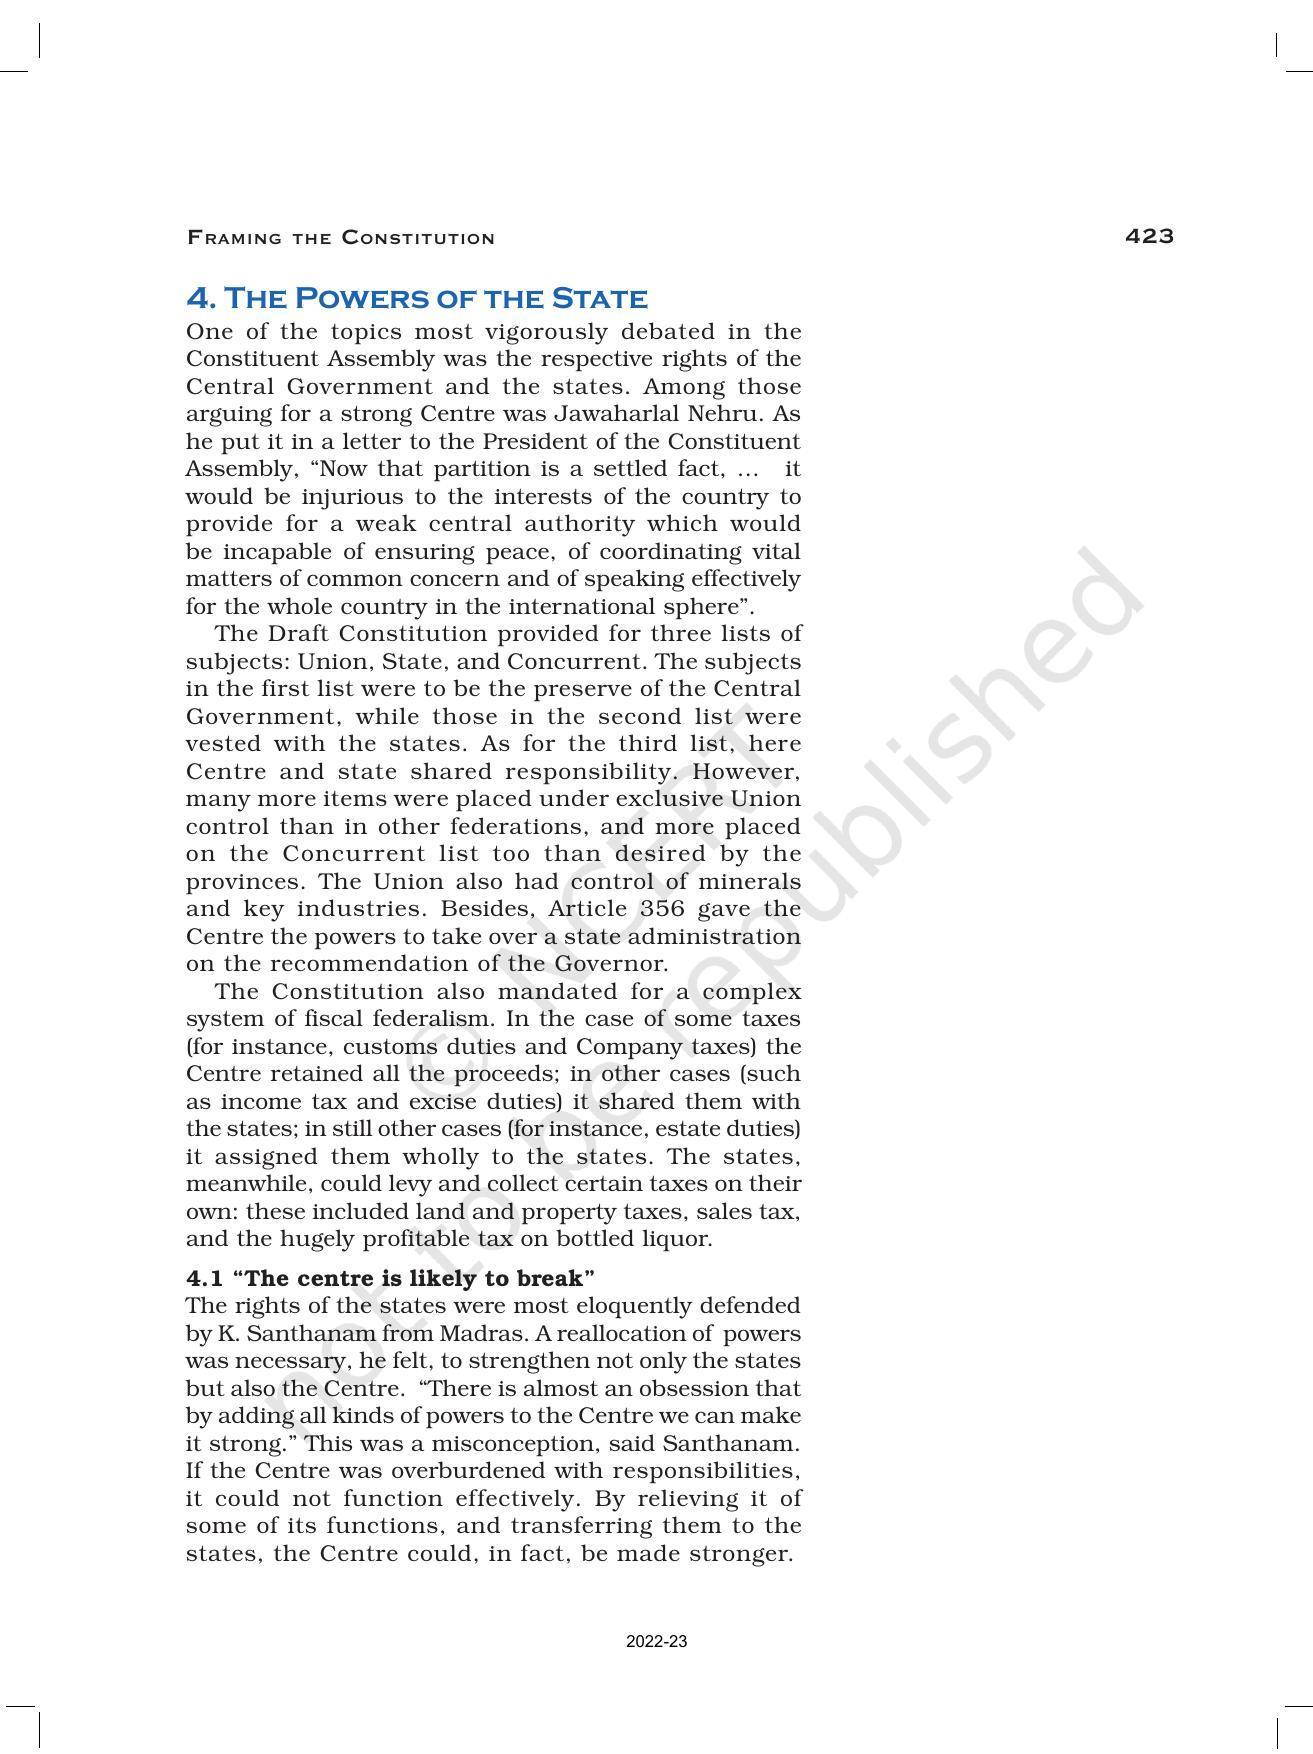 NCERT Book for Class 12 History (Part-III) Chapter 15 Framing and the Constitution - Page 19